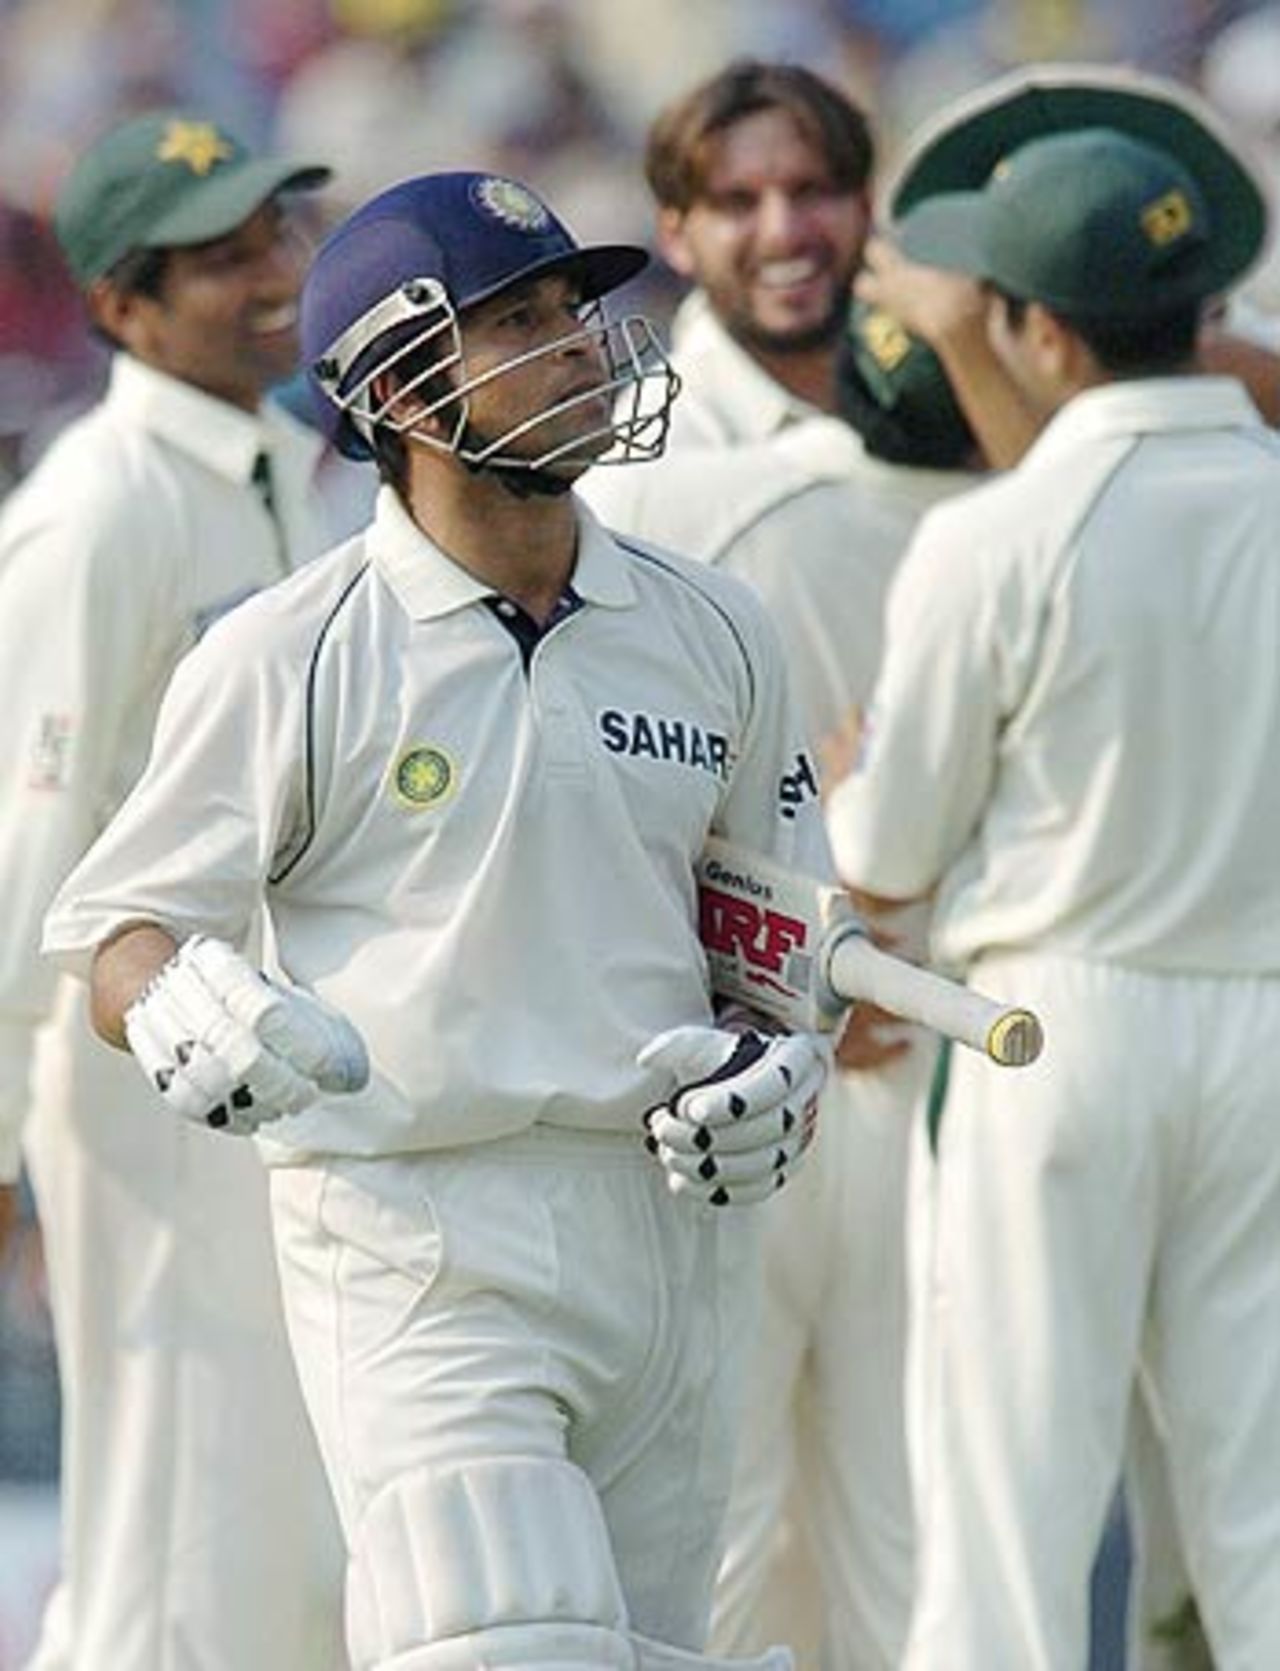 Shahid Afridi started Pakistan's fightback by inducing a bottom edge from Sachin Tendulkar when he was beginning to look dangerous, India v Pakistan, 2nd Test, Kolkata, March 16, 2005